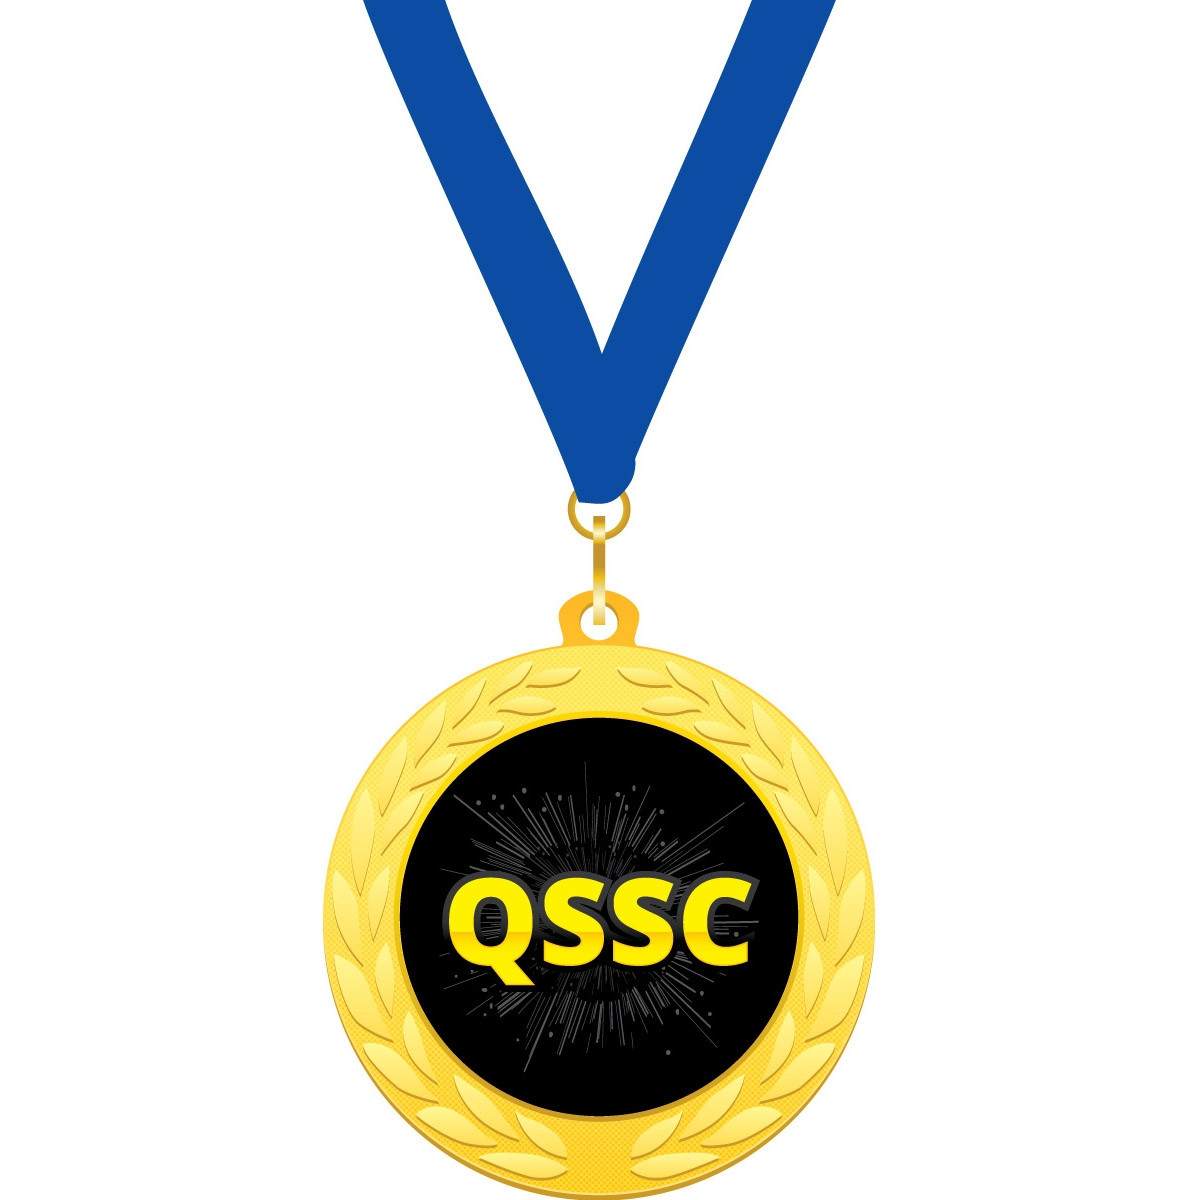 Custom 2 in. Gold Medallion with Blue Neck Ribbon (QSSC)